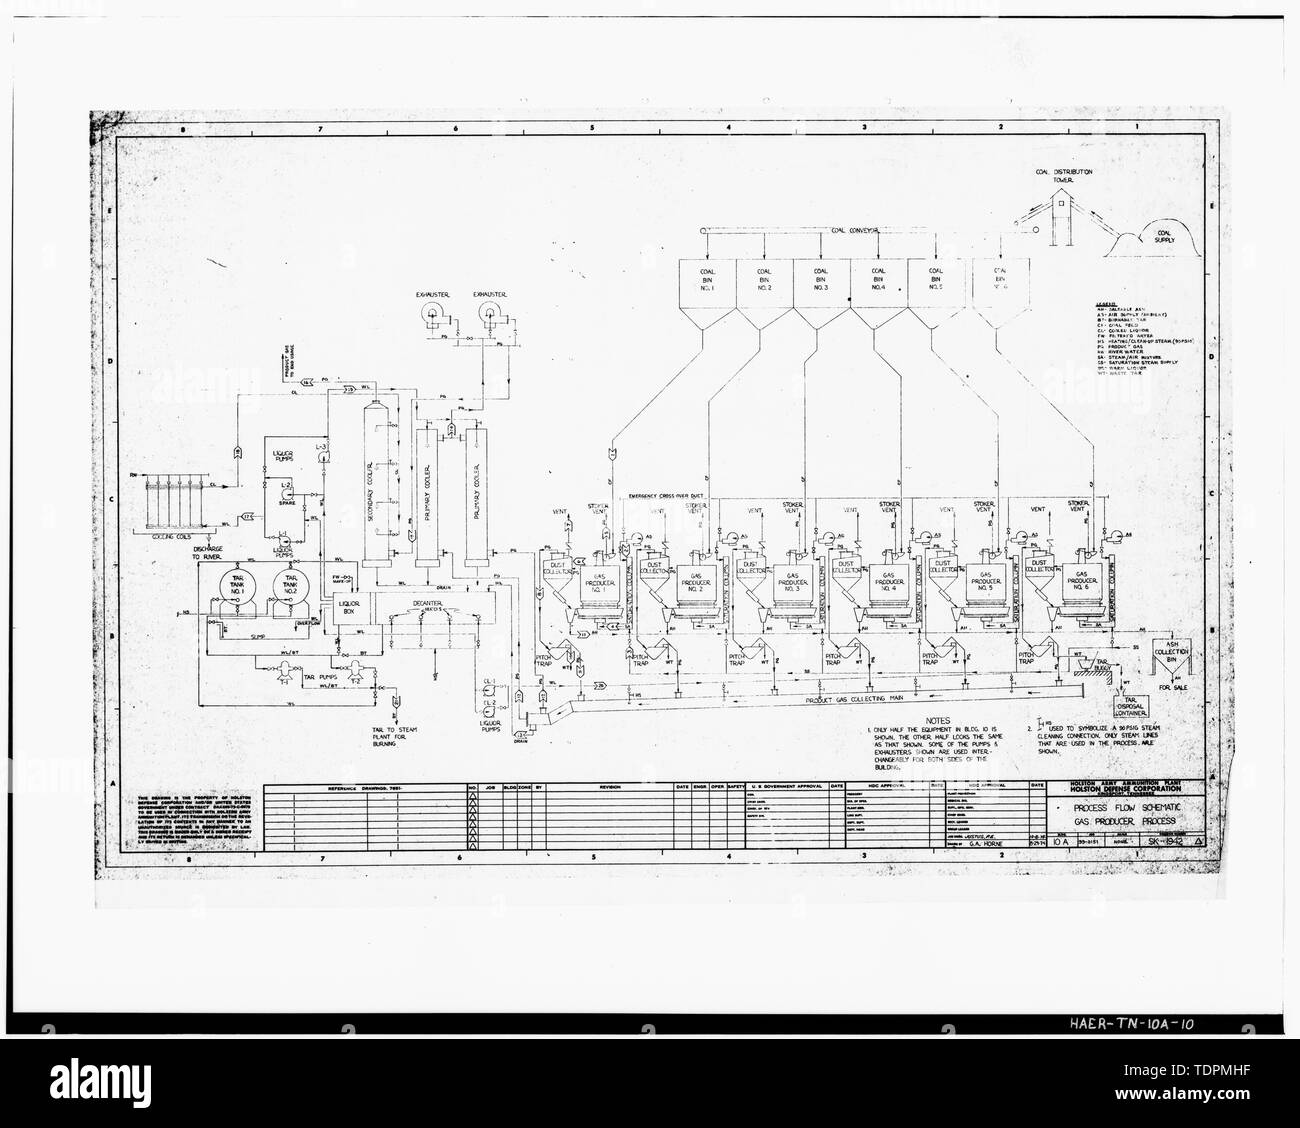 Photograph of a line drawing. 'PROCESS FLOW SCHEMATIC, GAS PRODUCER PROCESS, BUILDING 10A.' Holston Army Ammunition Plant, Holston Defense Corporation. August 29, 1974. Delineator- G. A. Horne. Drawing - SK-1942. - Holston Army Ammunition Plant, Producer Gas Plant, Kingsport, Sullivan County, TN; U.S. Army; Tennessee Eastman Corporation; U.S. Army Corps of Engineers; Fraser-Brace Co., Inc.; Charles T. Main, Inc.; Semet Solvay Engineering Corporation; Mack, Robert C, historian; Dennett Muessig, Ryan and Associates, Ltd., photographer; Tompkins, Sally Kress, program manager; Lange, Robie S, proj Stock Photo